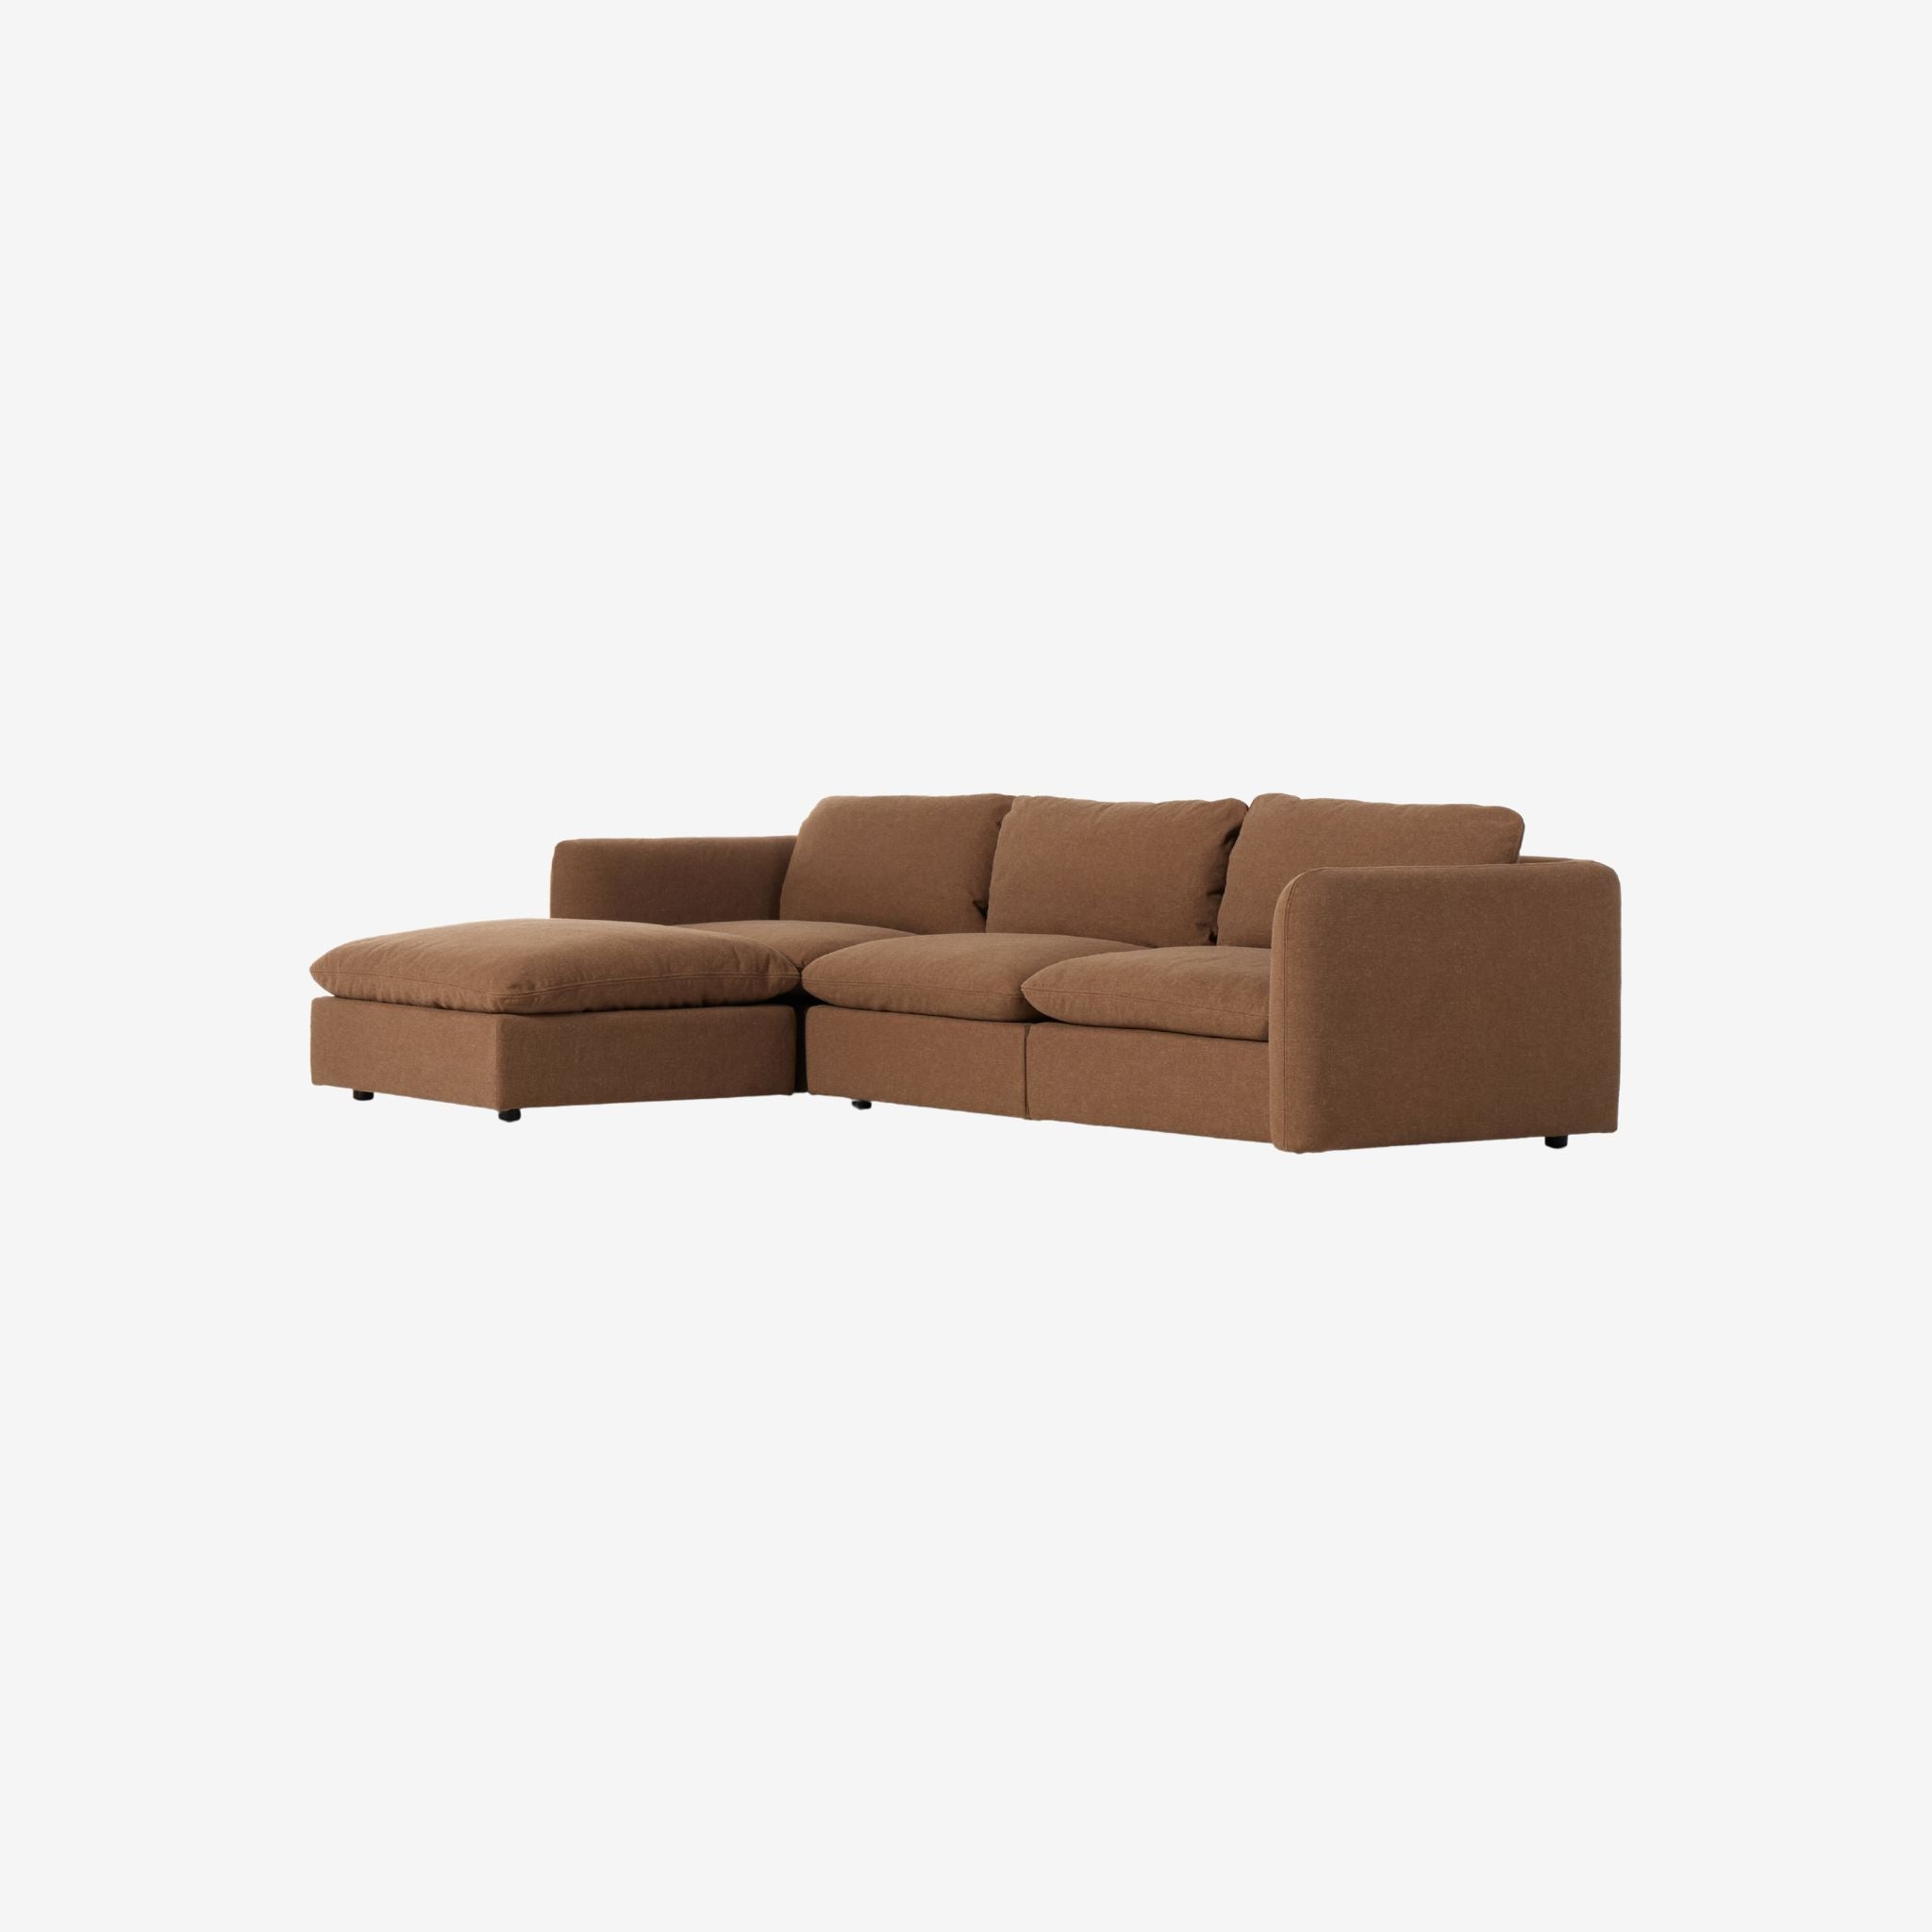 INGEL 3-PIECE SECTIONAL - Simply Elevated home furnishing 